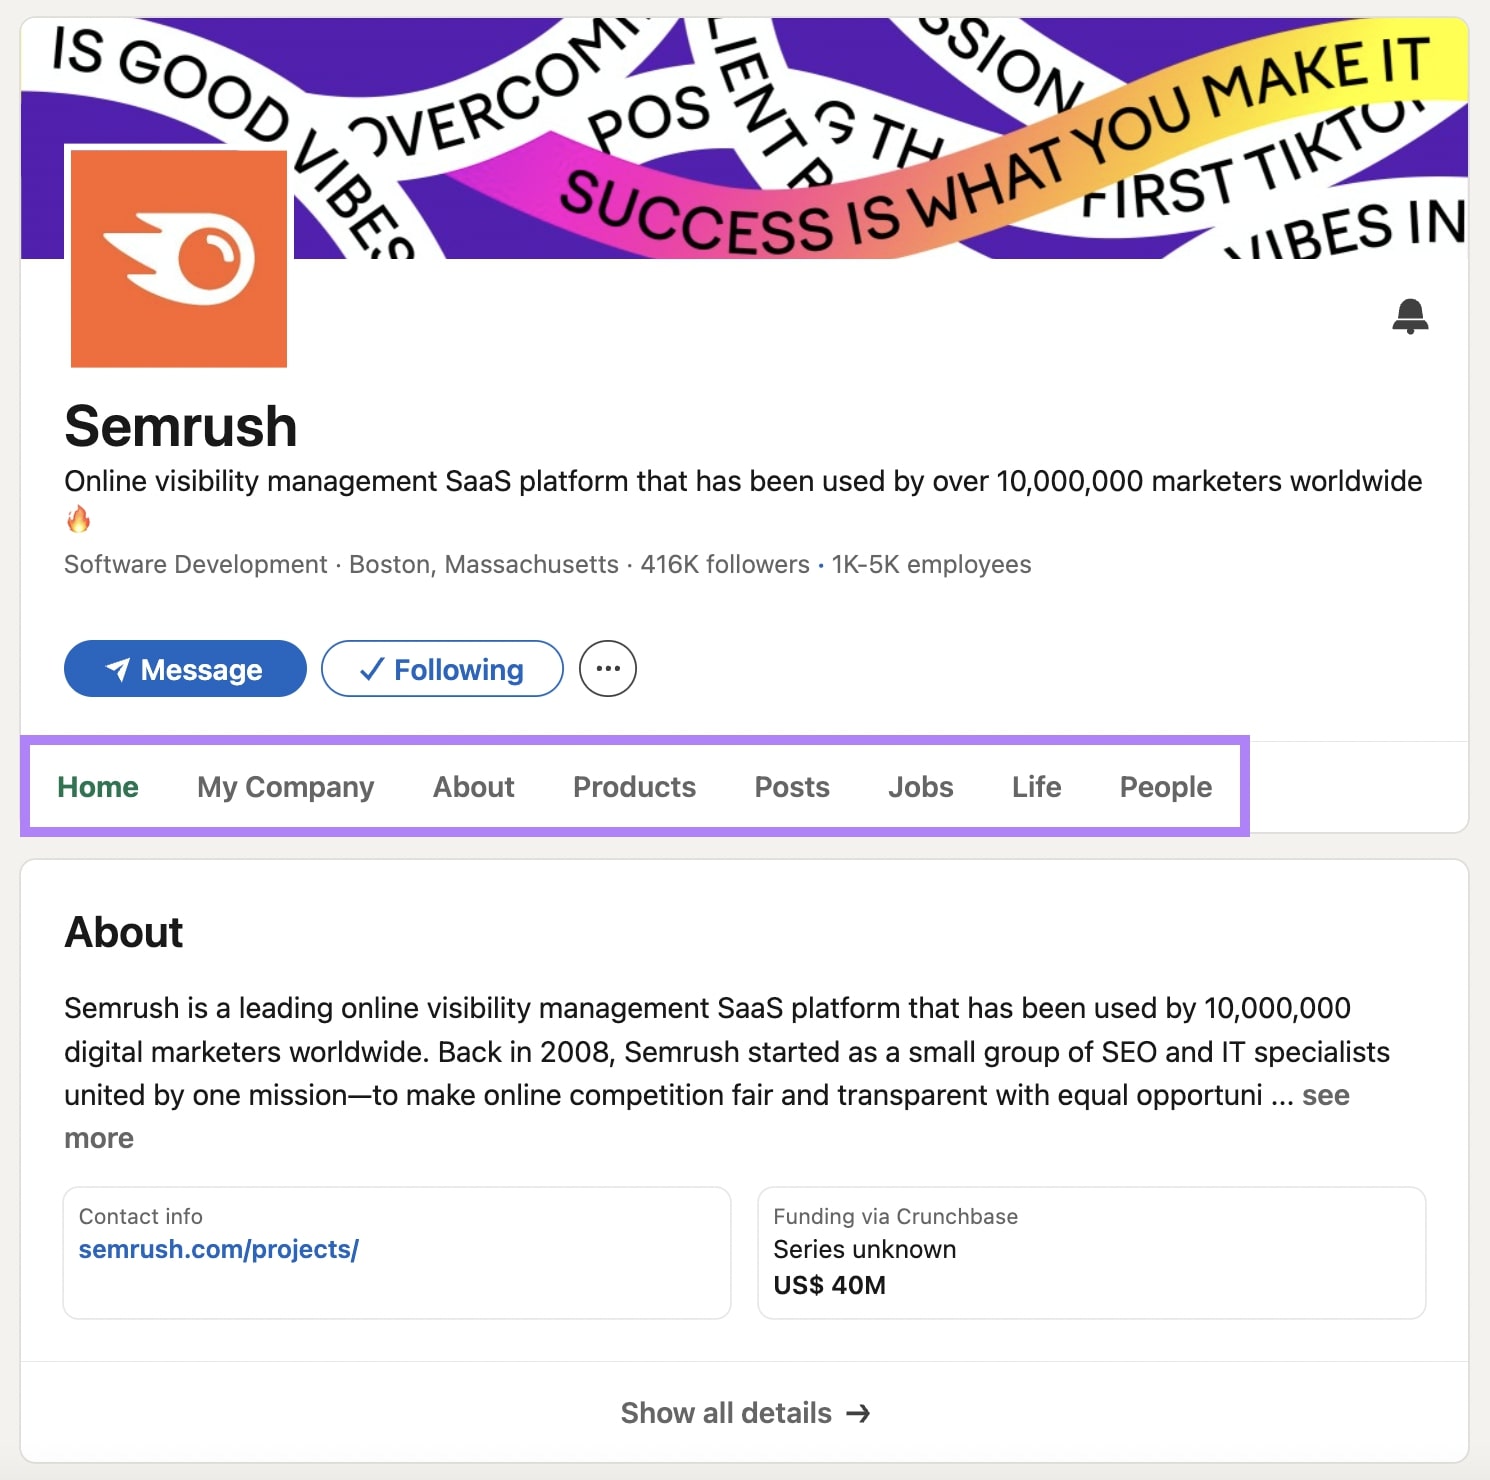 LinkedIn business page of Semrush with Home, About, Products, Posts, Jobs, Life and People tabs highlighted